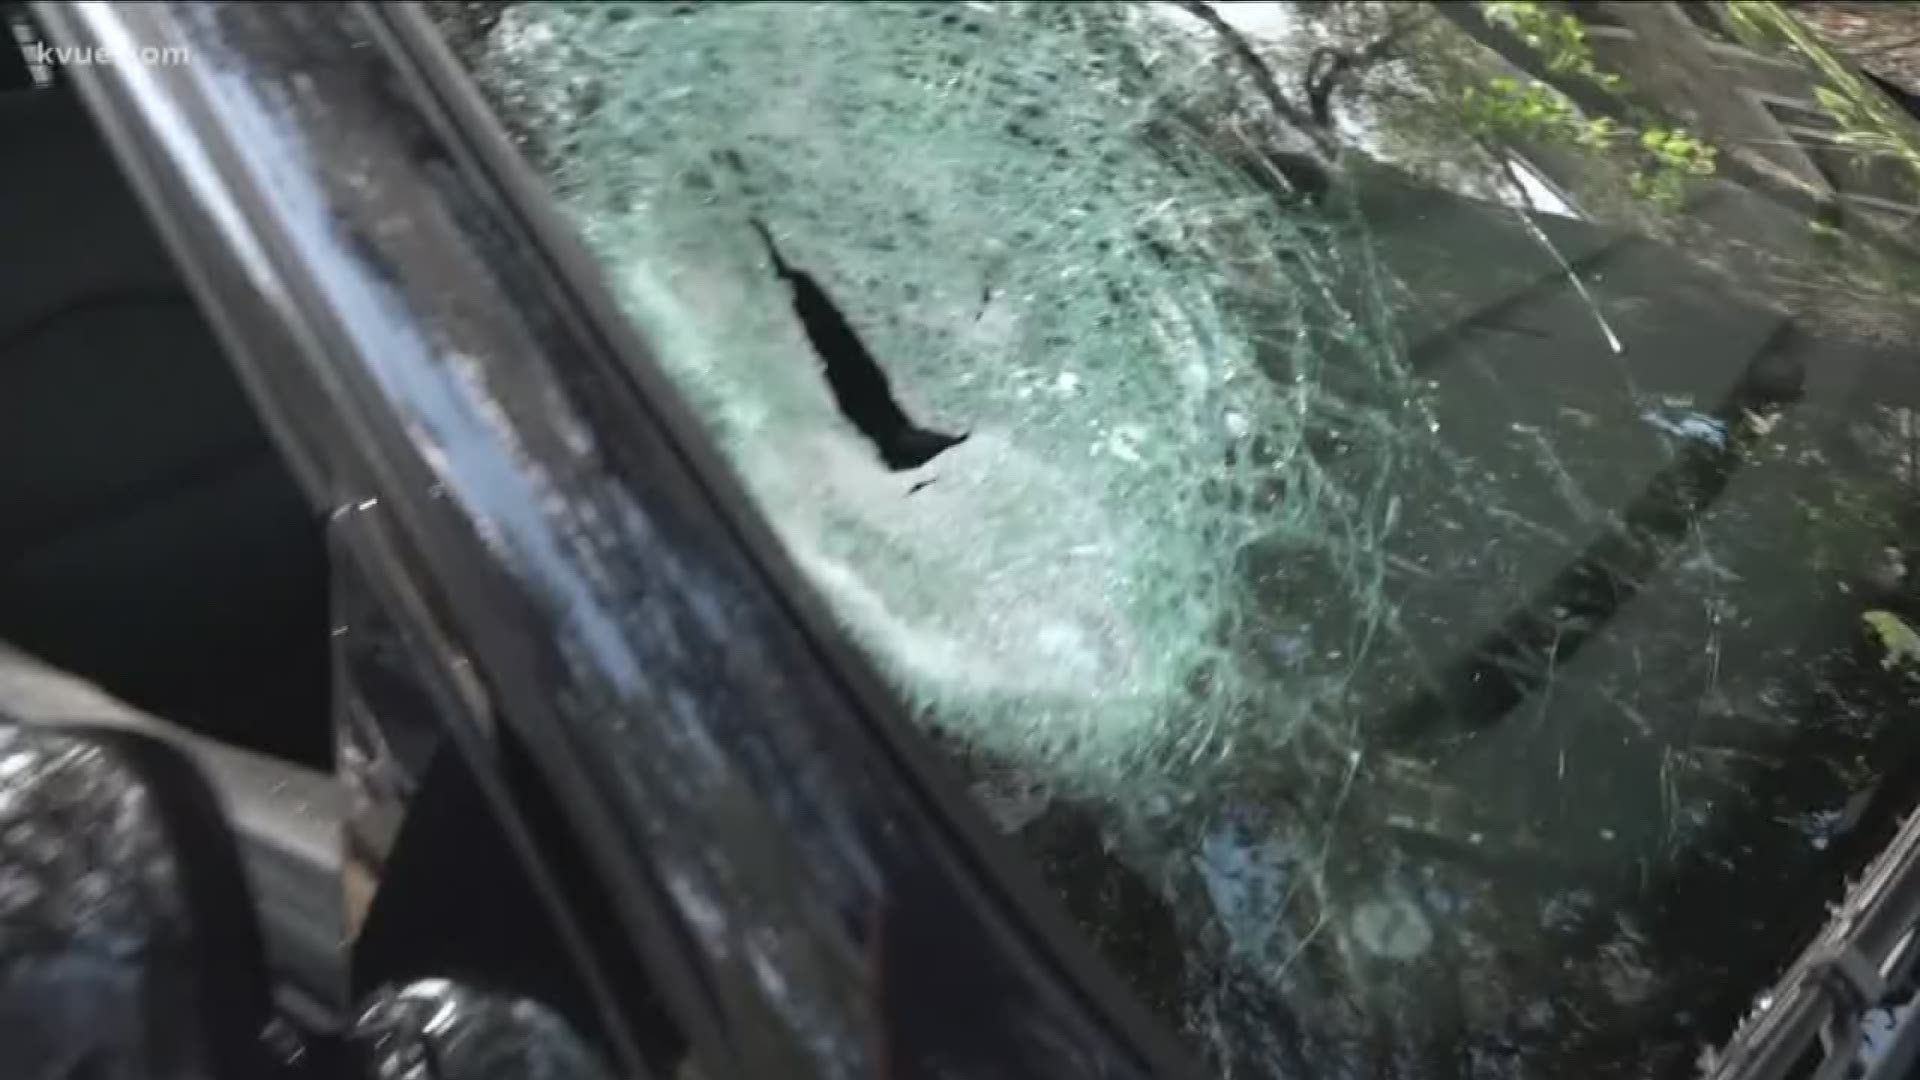 Just a few days after a piece of concrete went through a woman's windshield on 183 in North Austin, something similar happened overnight.